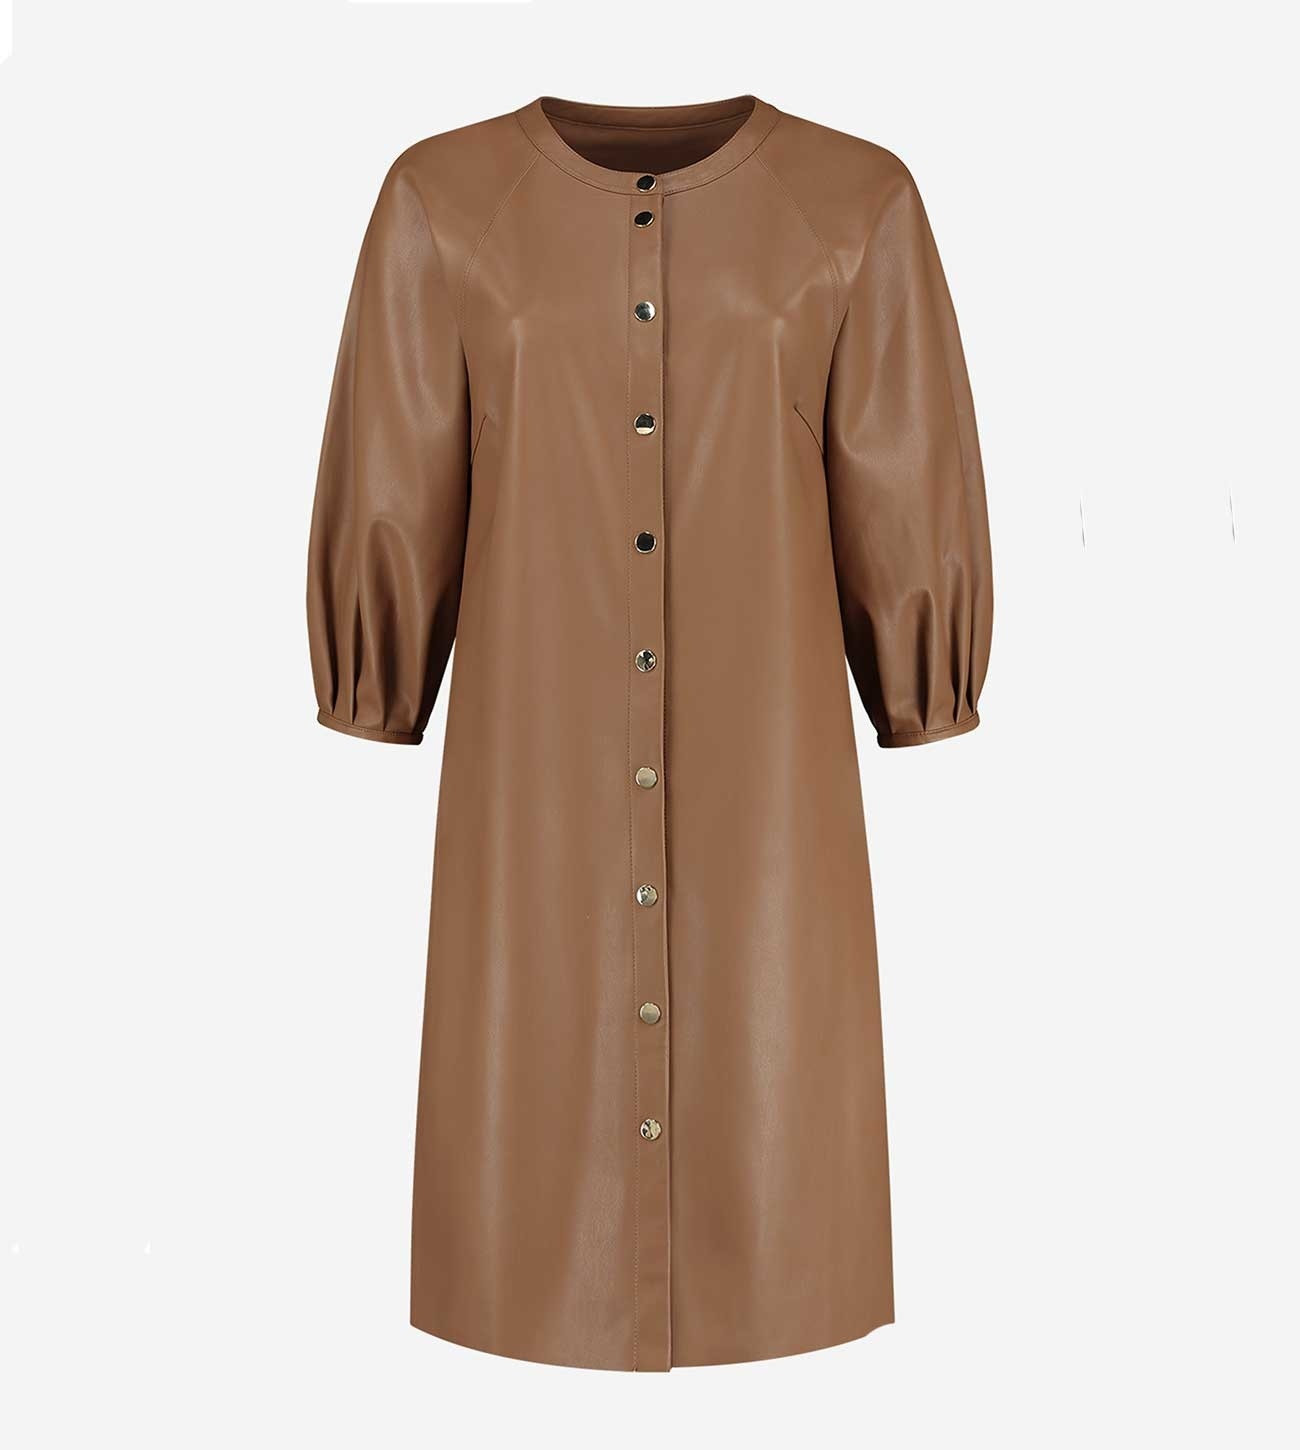 Afbeelding van Fifth House Fifth house maura dress fh 5-201 2104 latte